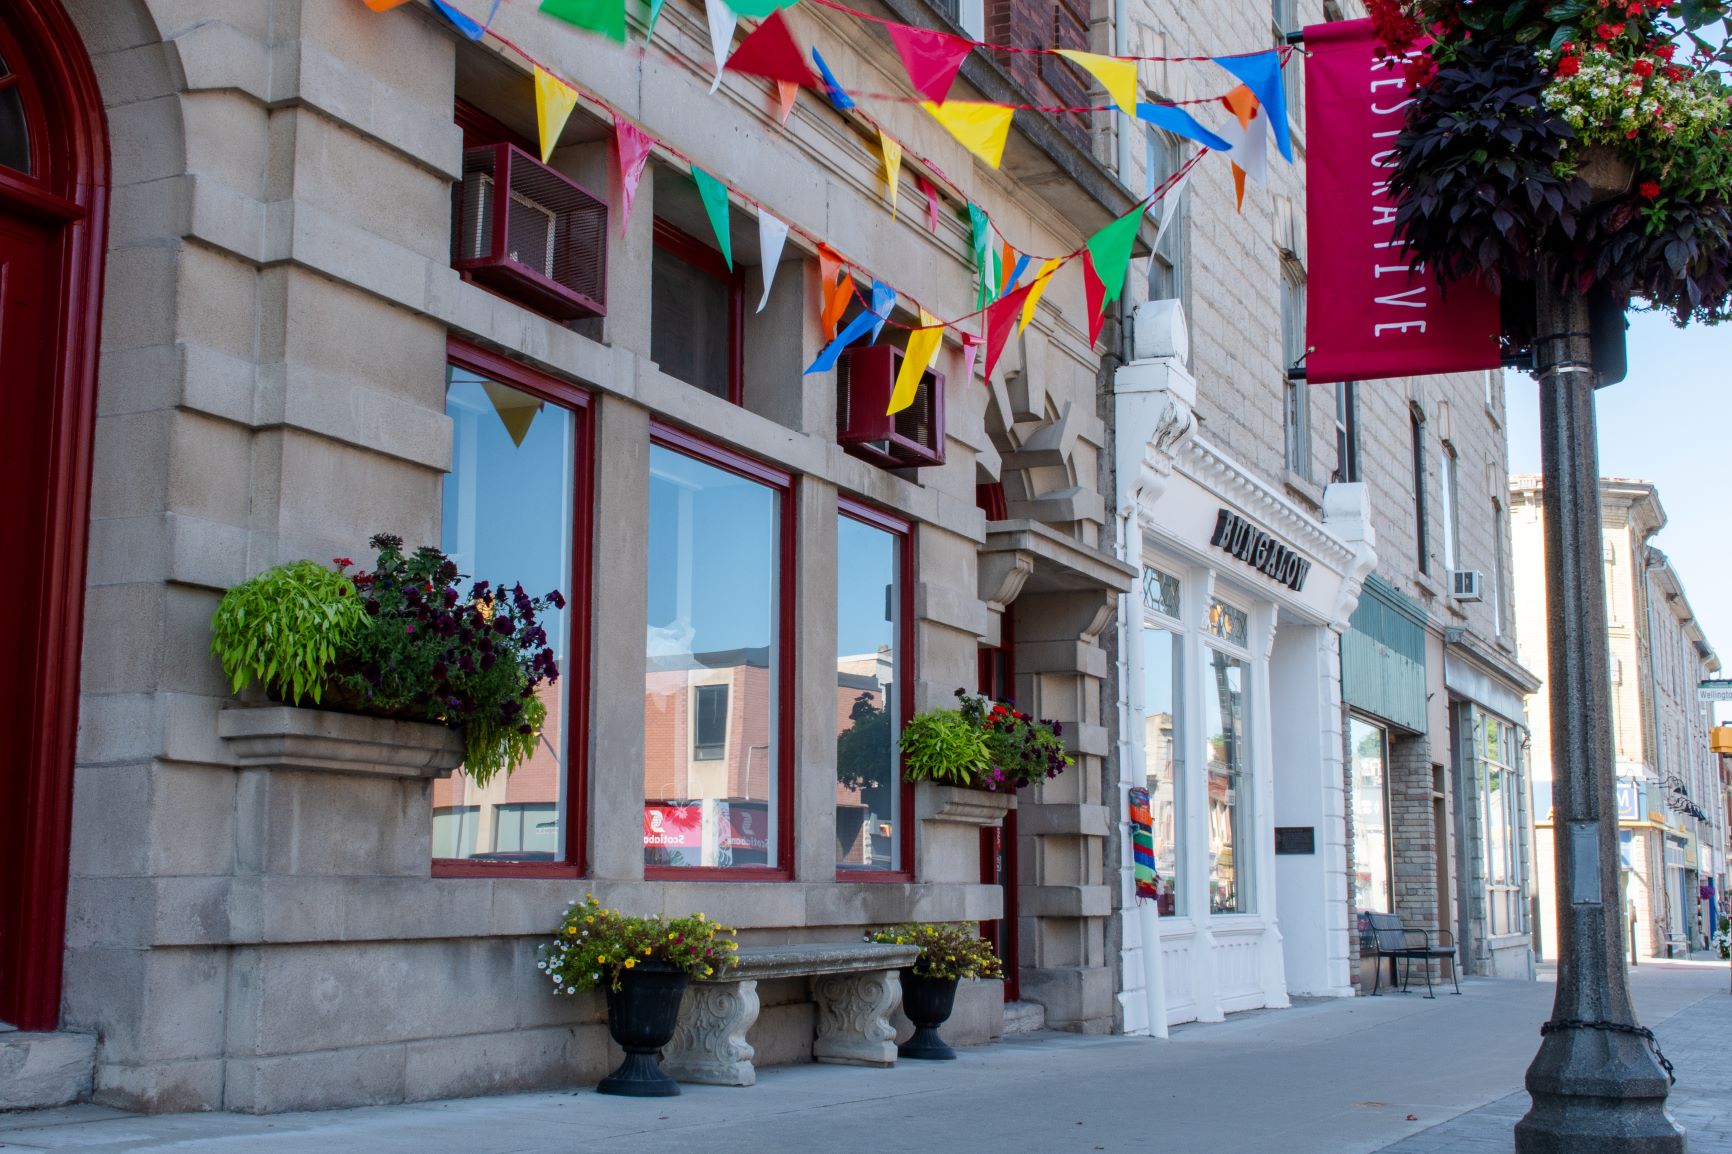 A walk through the historic streets of St. Marys, Ontario offers a first-hand look at the stunning limestone architecture and vibrant downtown core.